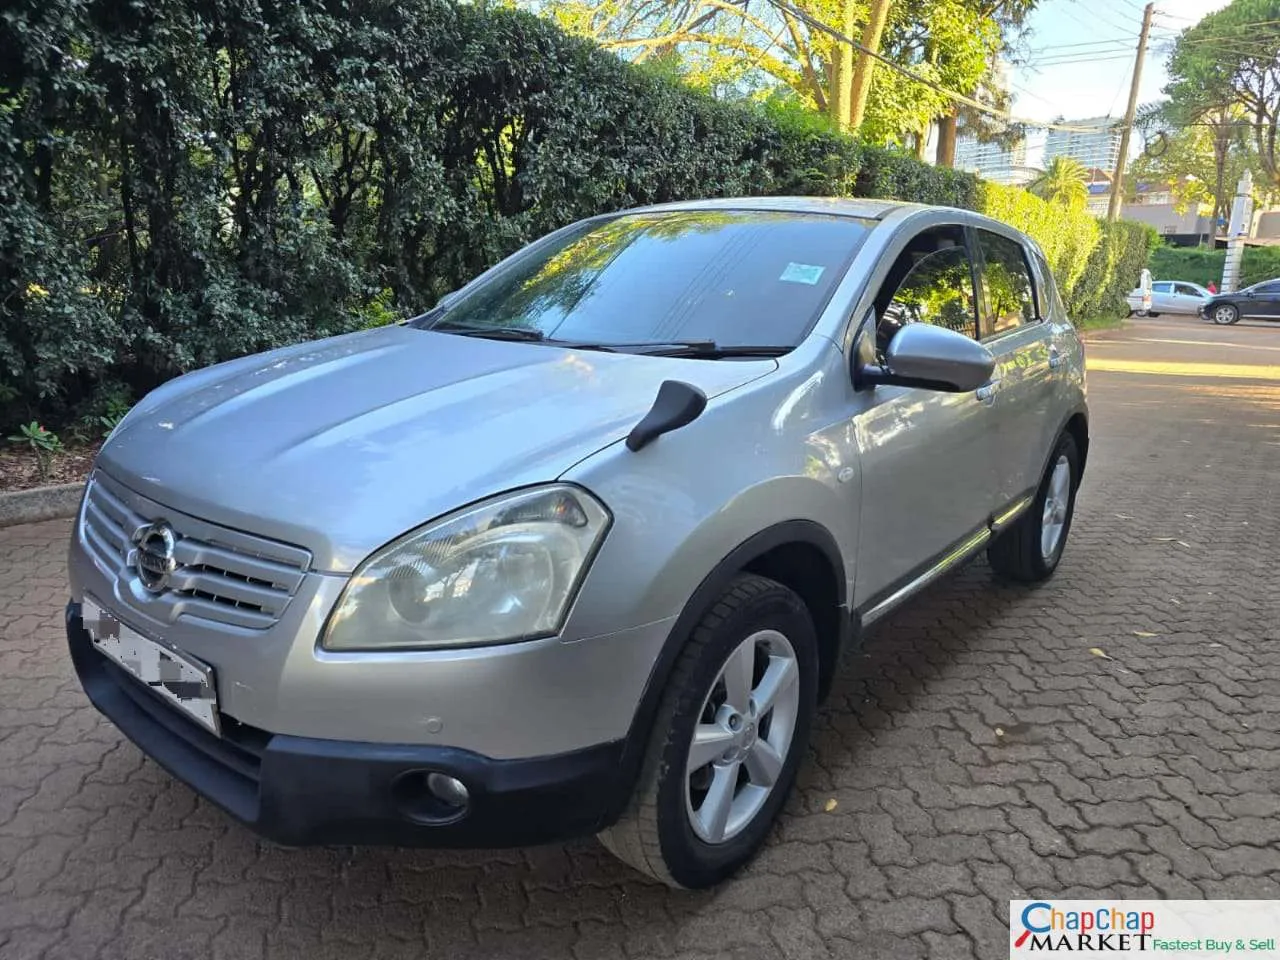 Nissan Dualis for sale in Kenya 🔥 SALE Pay 30% Deposit Trade in Ok EXCLUSIVE Hire purchase installments